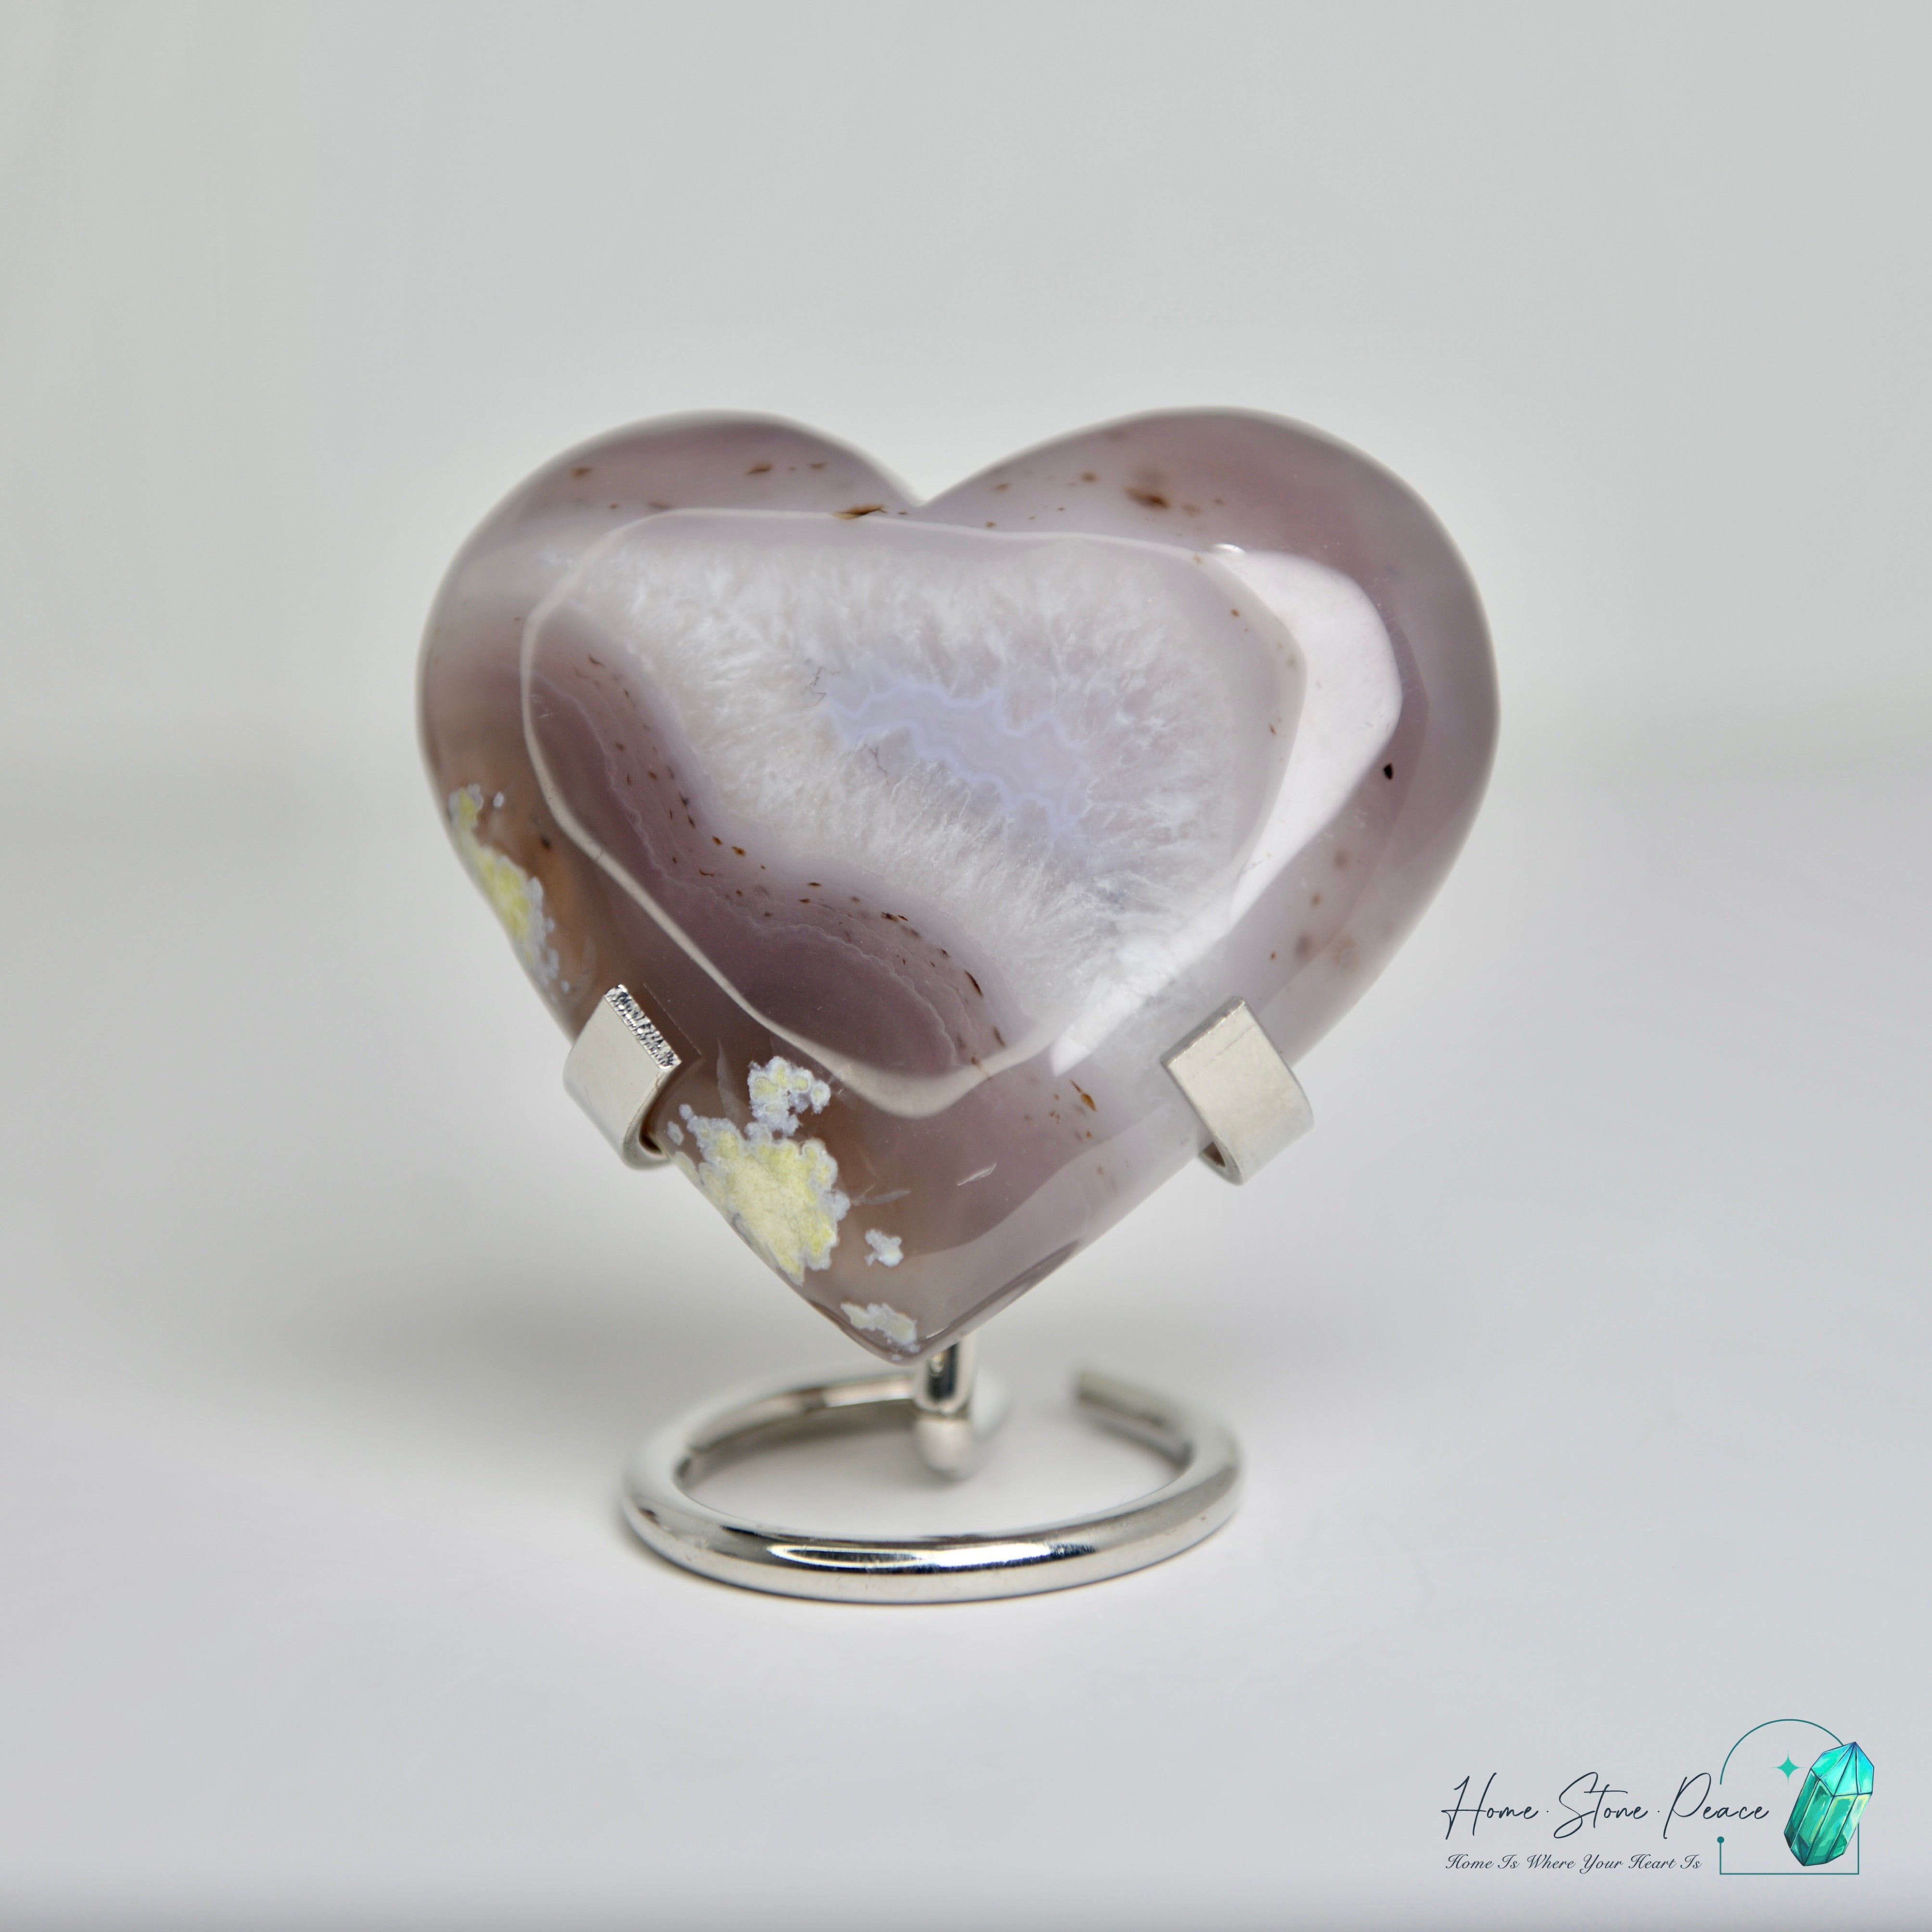 Agate Geode Heart 瑪瑙心